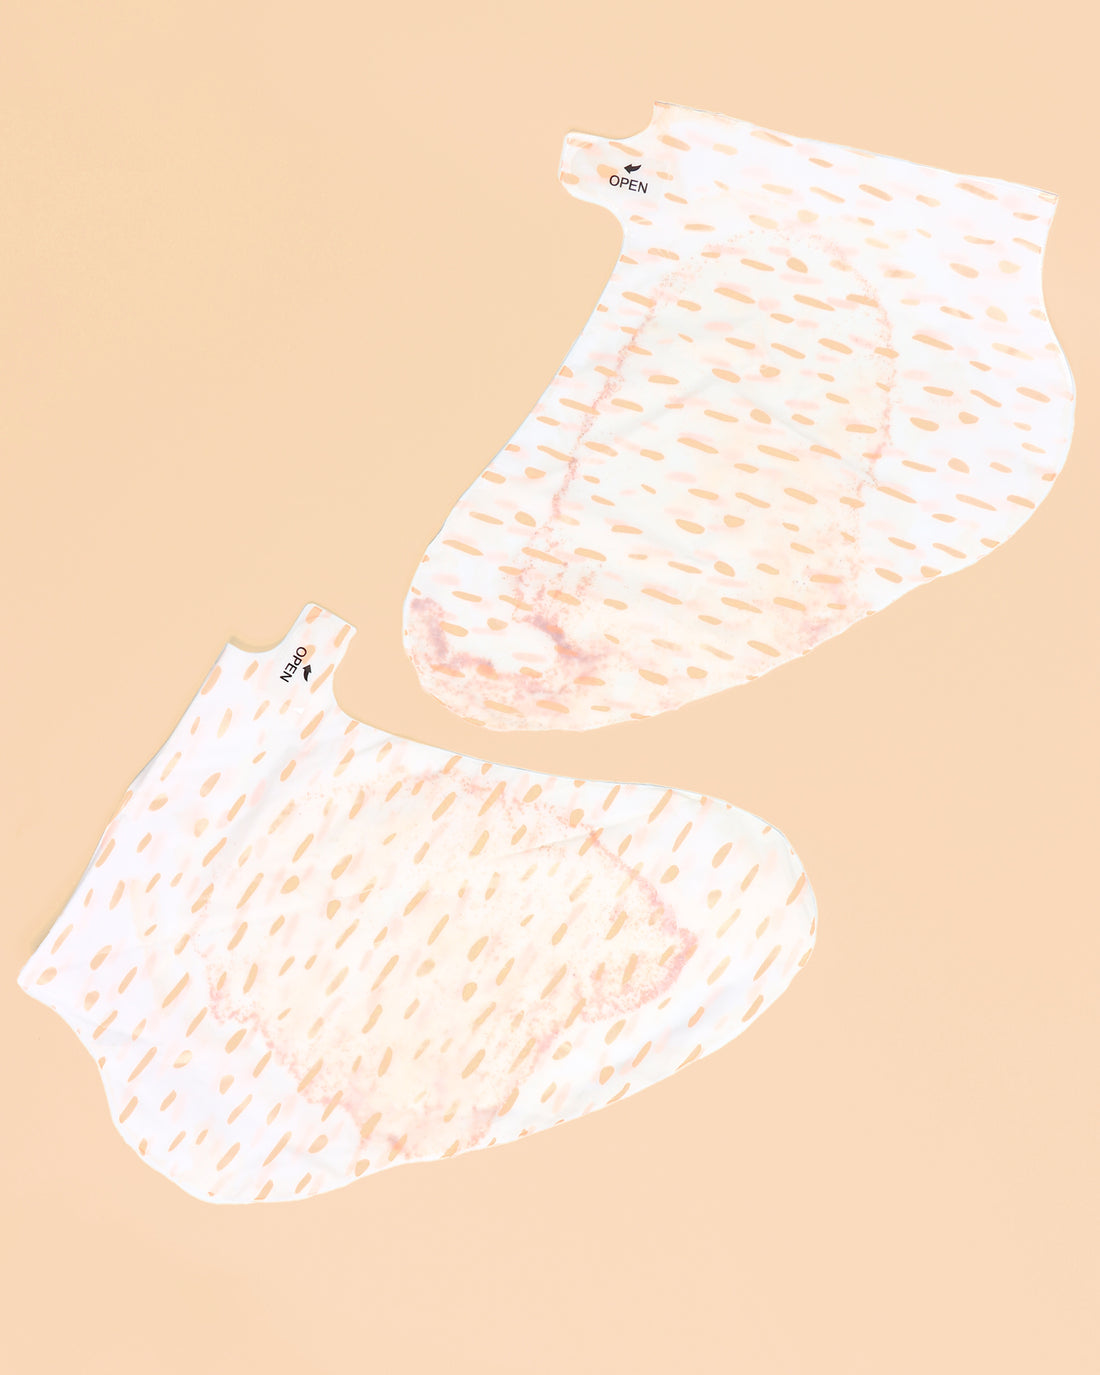 Sole_mates_foot_mask_packet_3-394